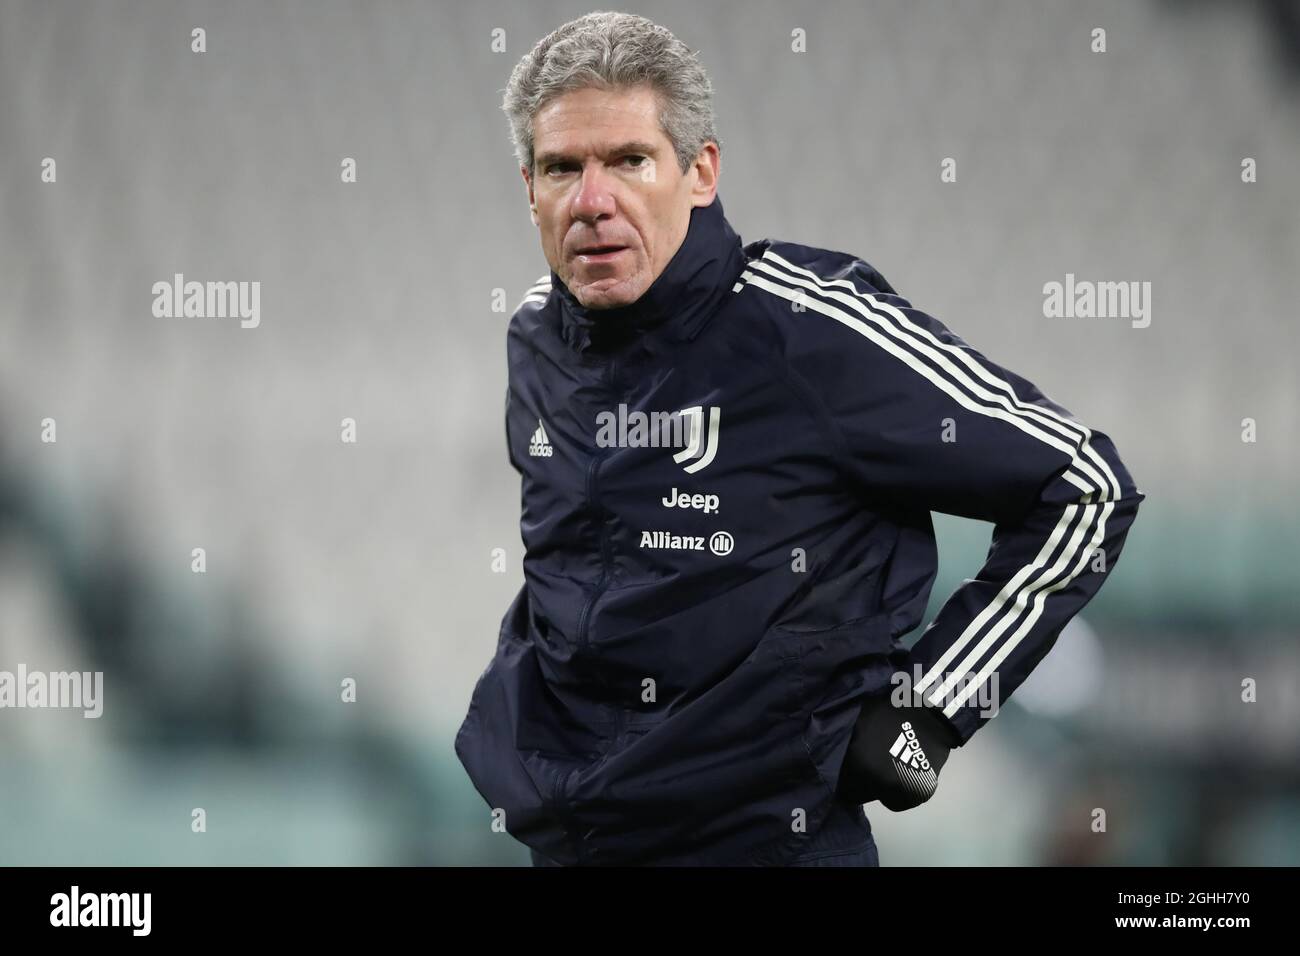 Claudio Filippi Juventus gopalkeeping coach during the warm up prior to the Serie A match at Allianz Stadium, Turin. Picture date: 10th January 2021. Picture credit should read: Jonathan Moscrop/Sportimage via PA Images Stock Photo